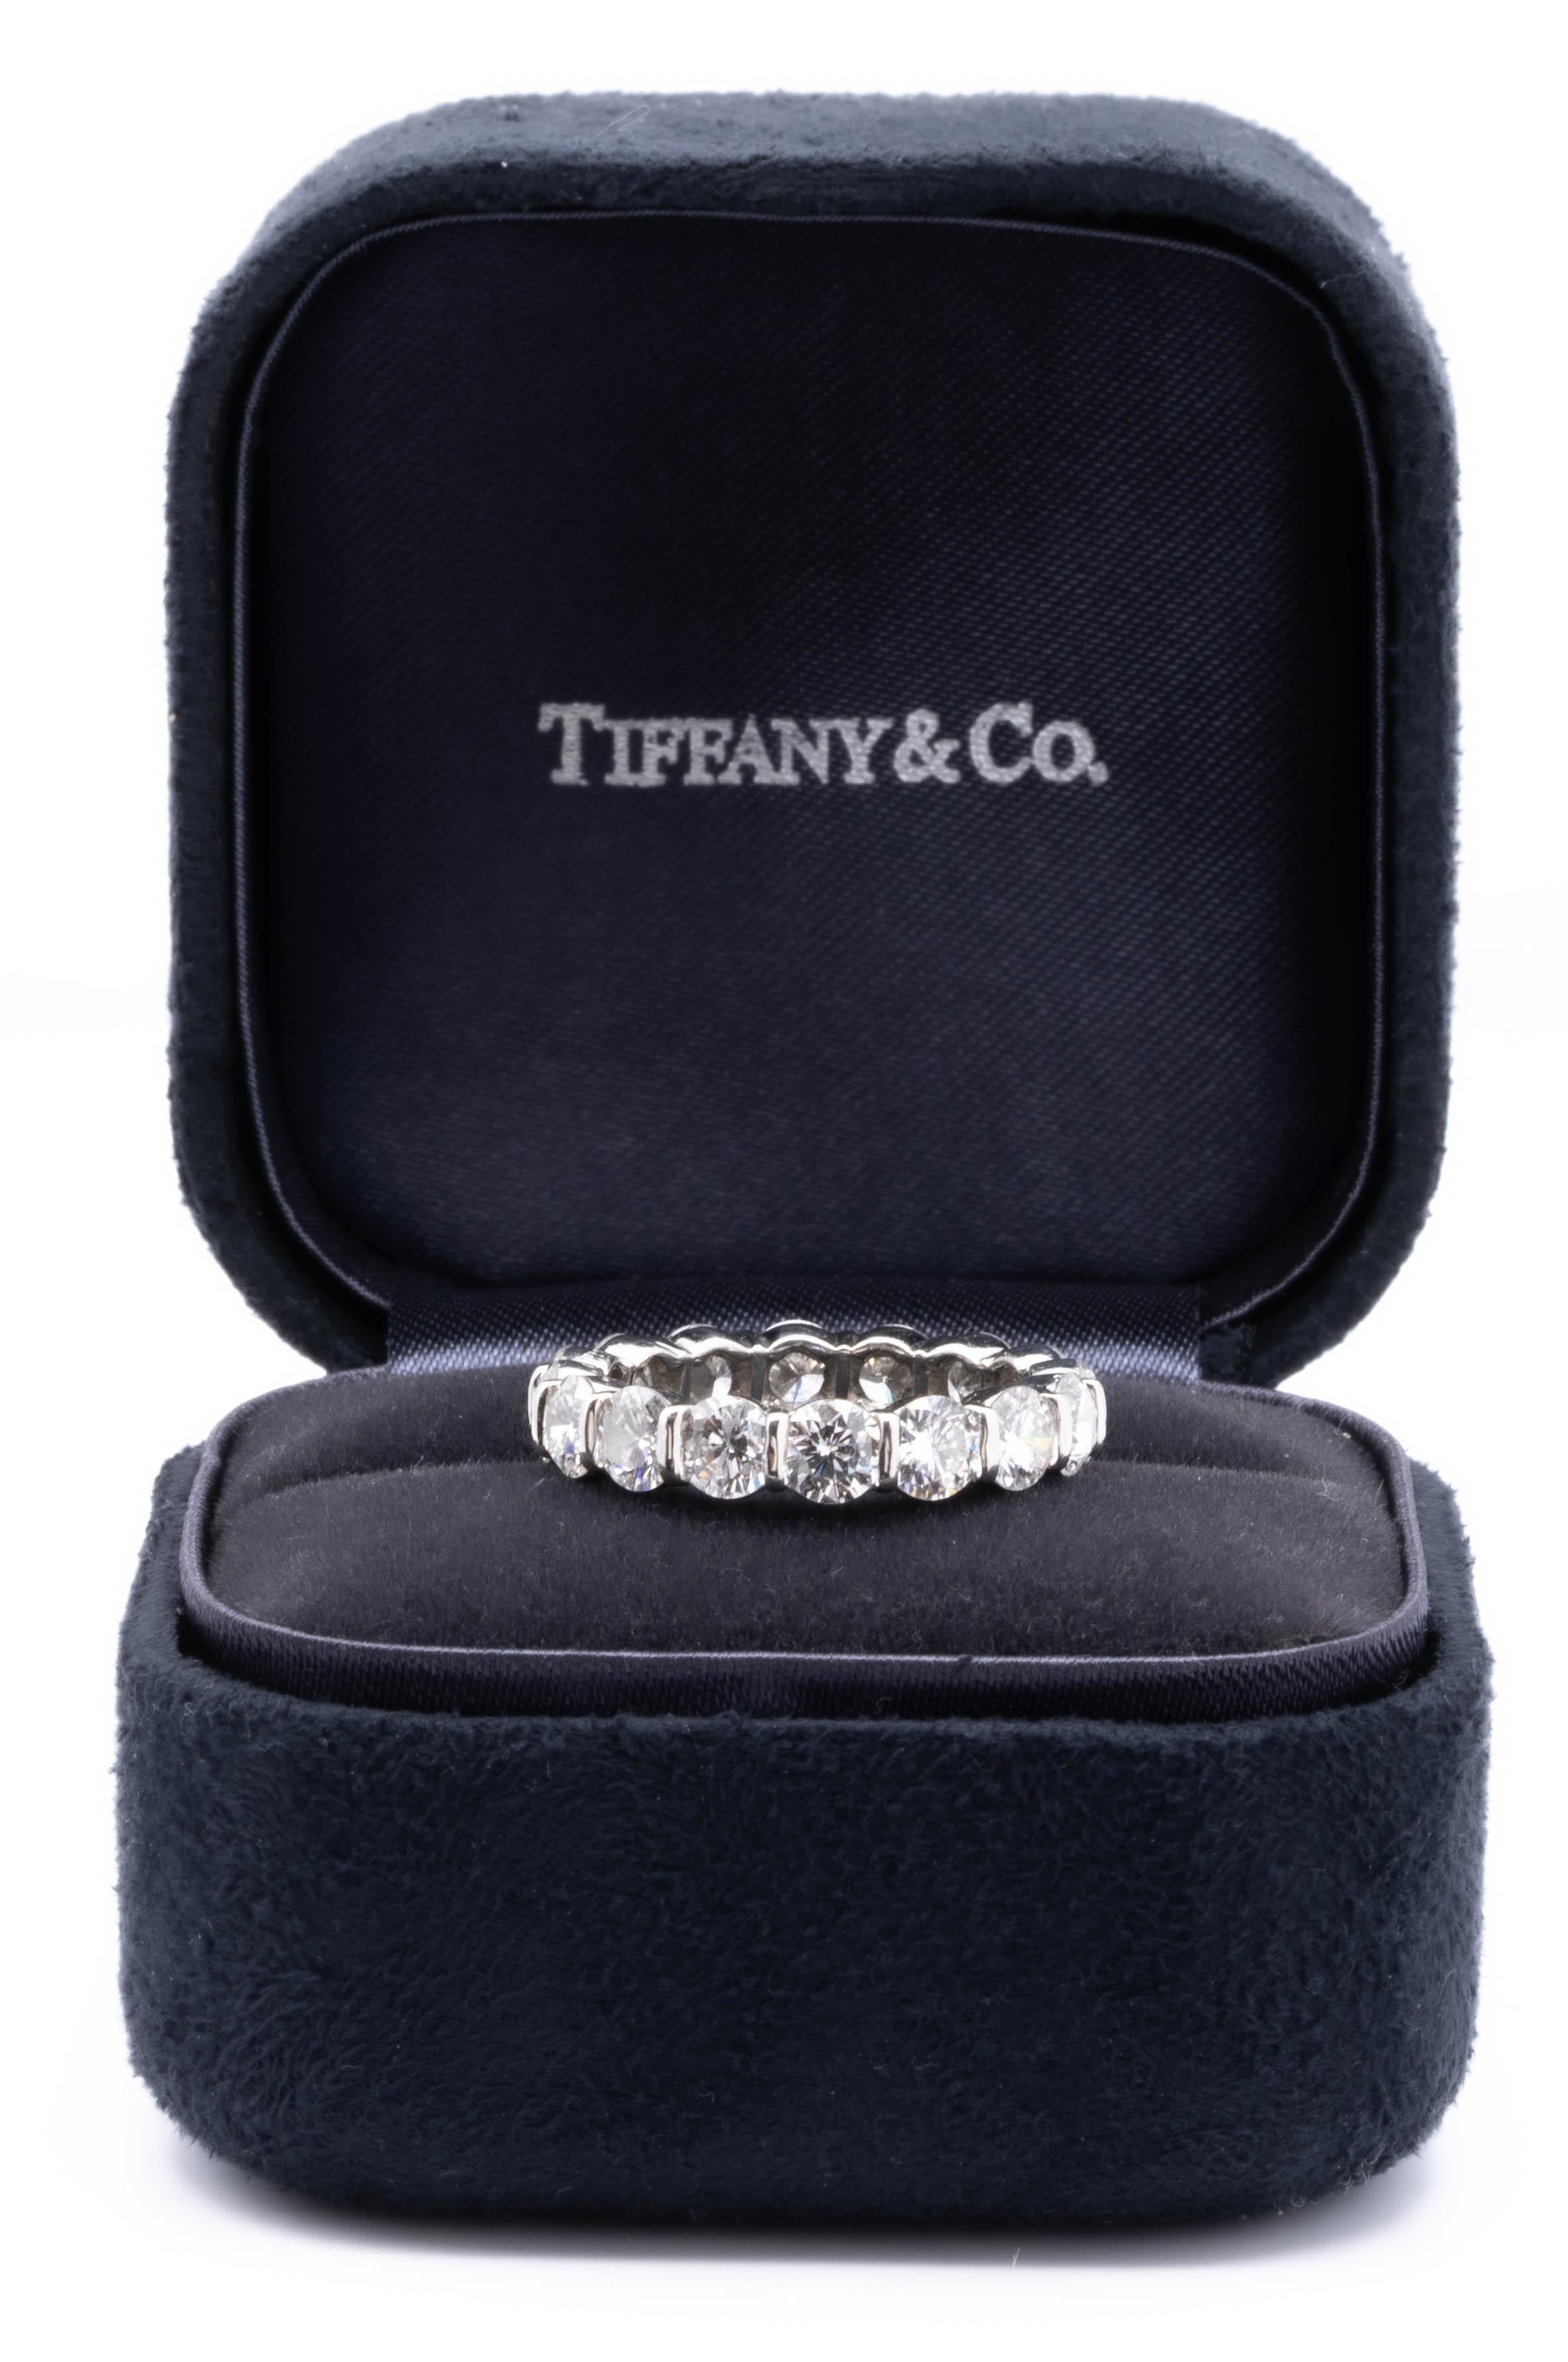 Tiffany & Co. Vintage Full Circle Eternity Ring finely crafted in Platinum with 16 Bar-Set round brilliant cut diamonds, weighing approximately  3.20 carats total weight , F-G color and VVS-VS clarity.
Band measures 4mm in width approximately.